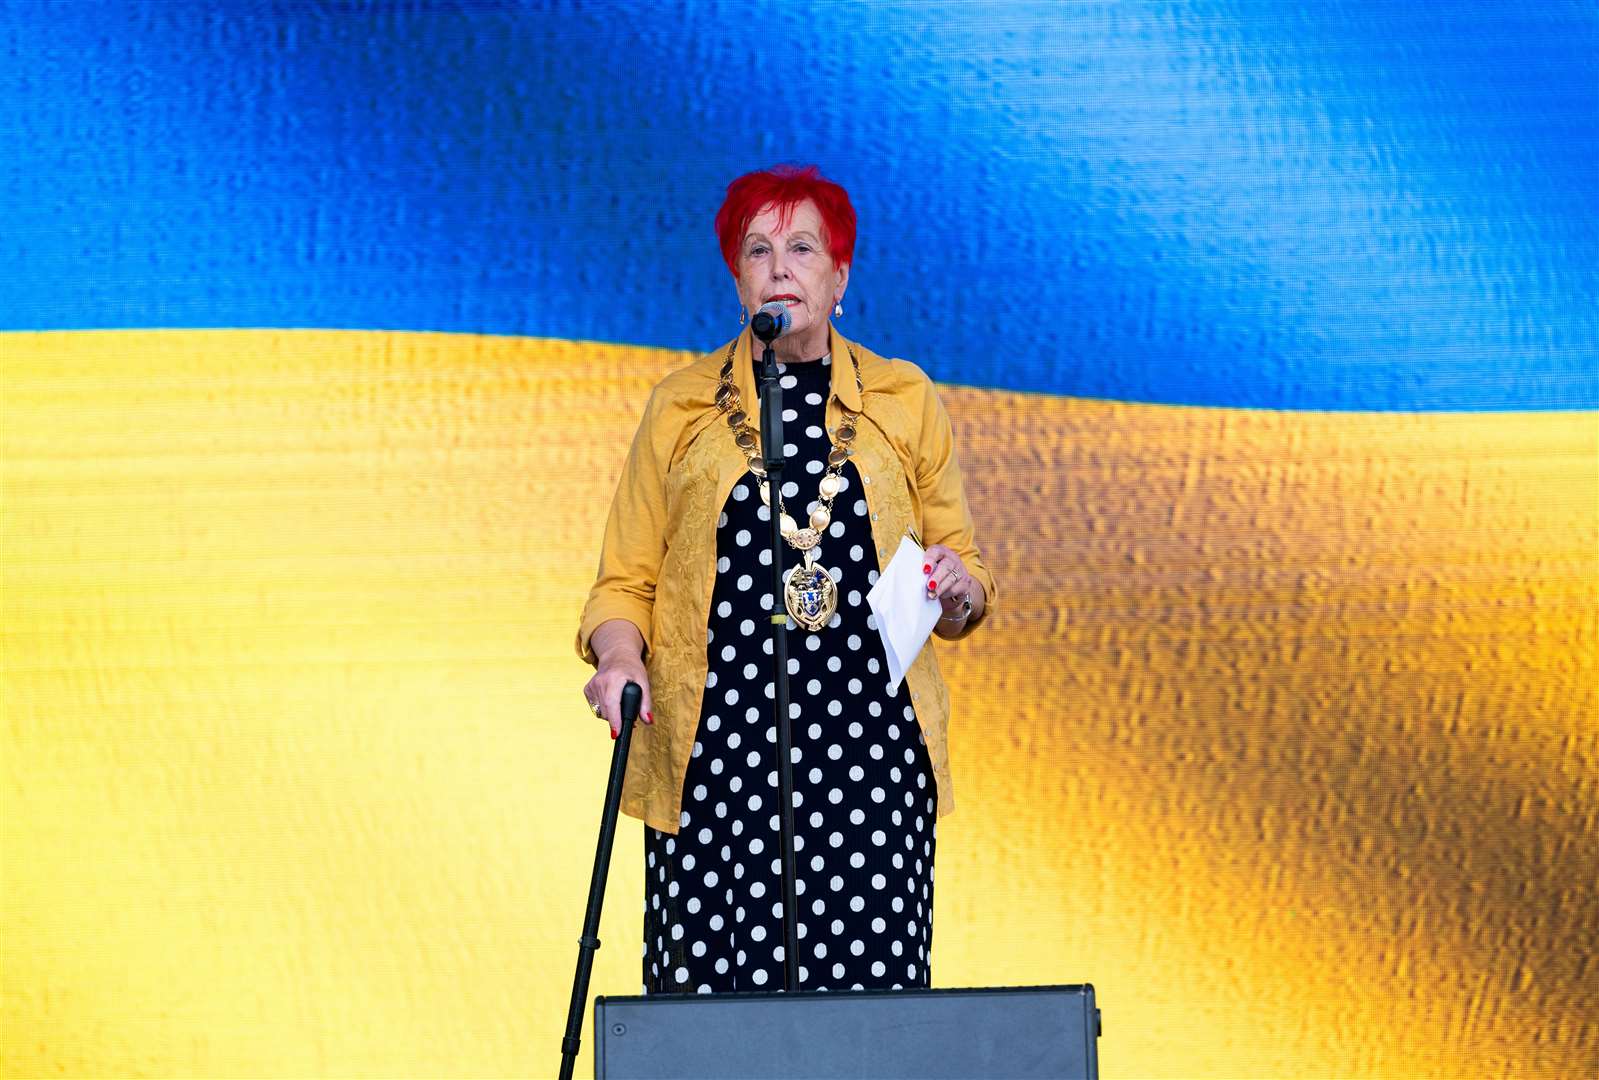 West Norfolk's Mayor Cllr Margaret Wilkinson wore yellow while giving a speech at the event.